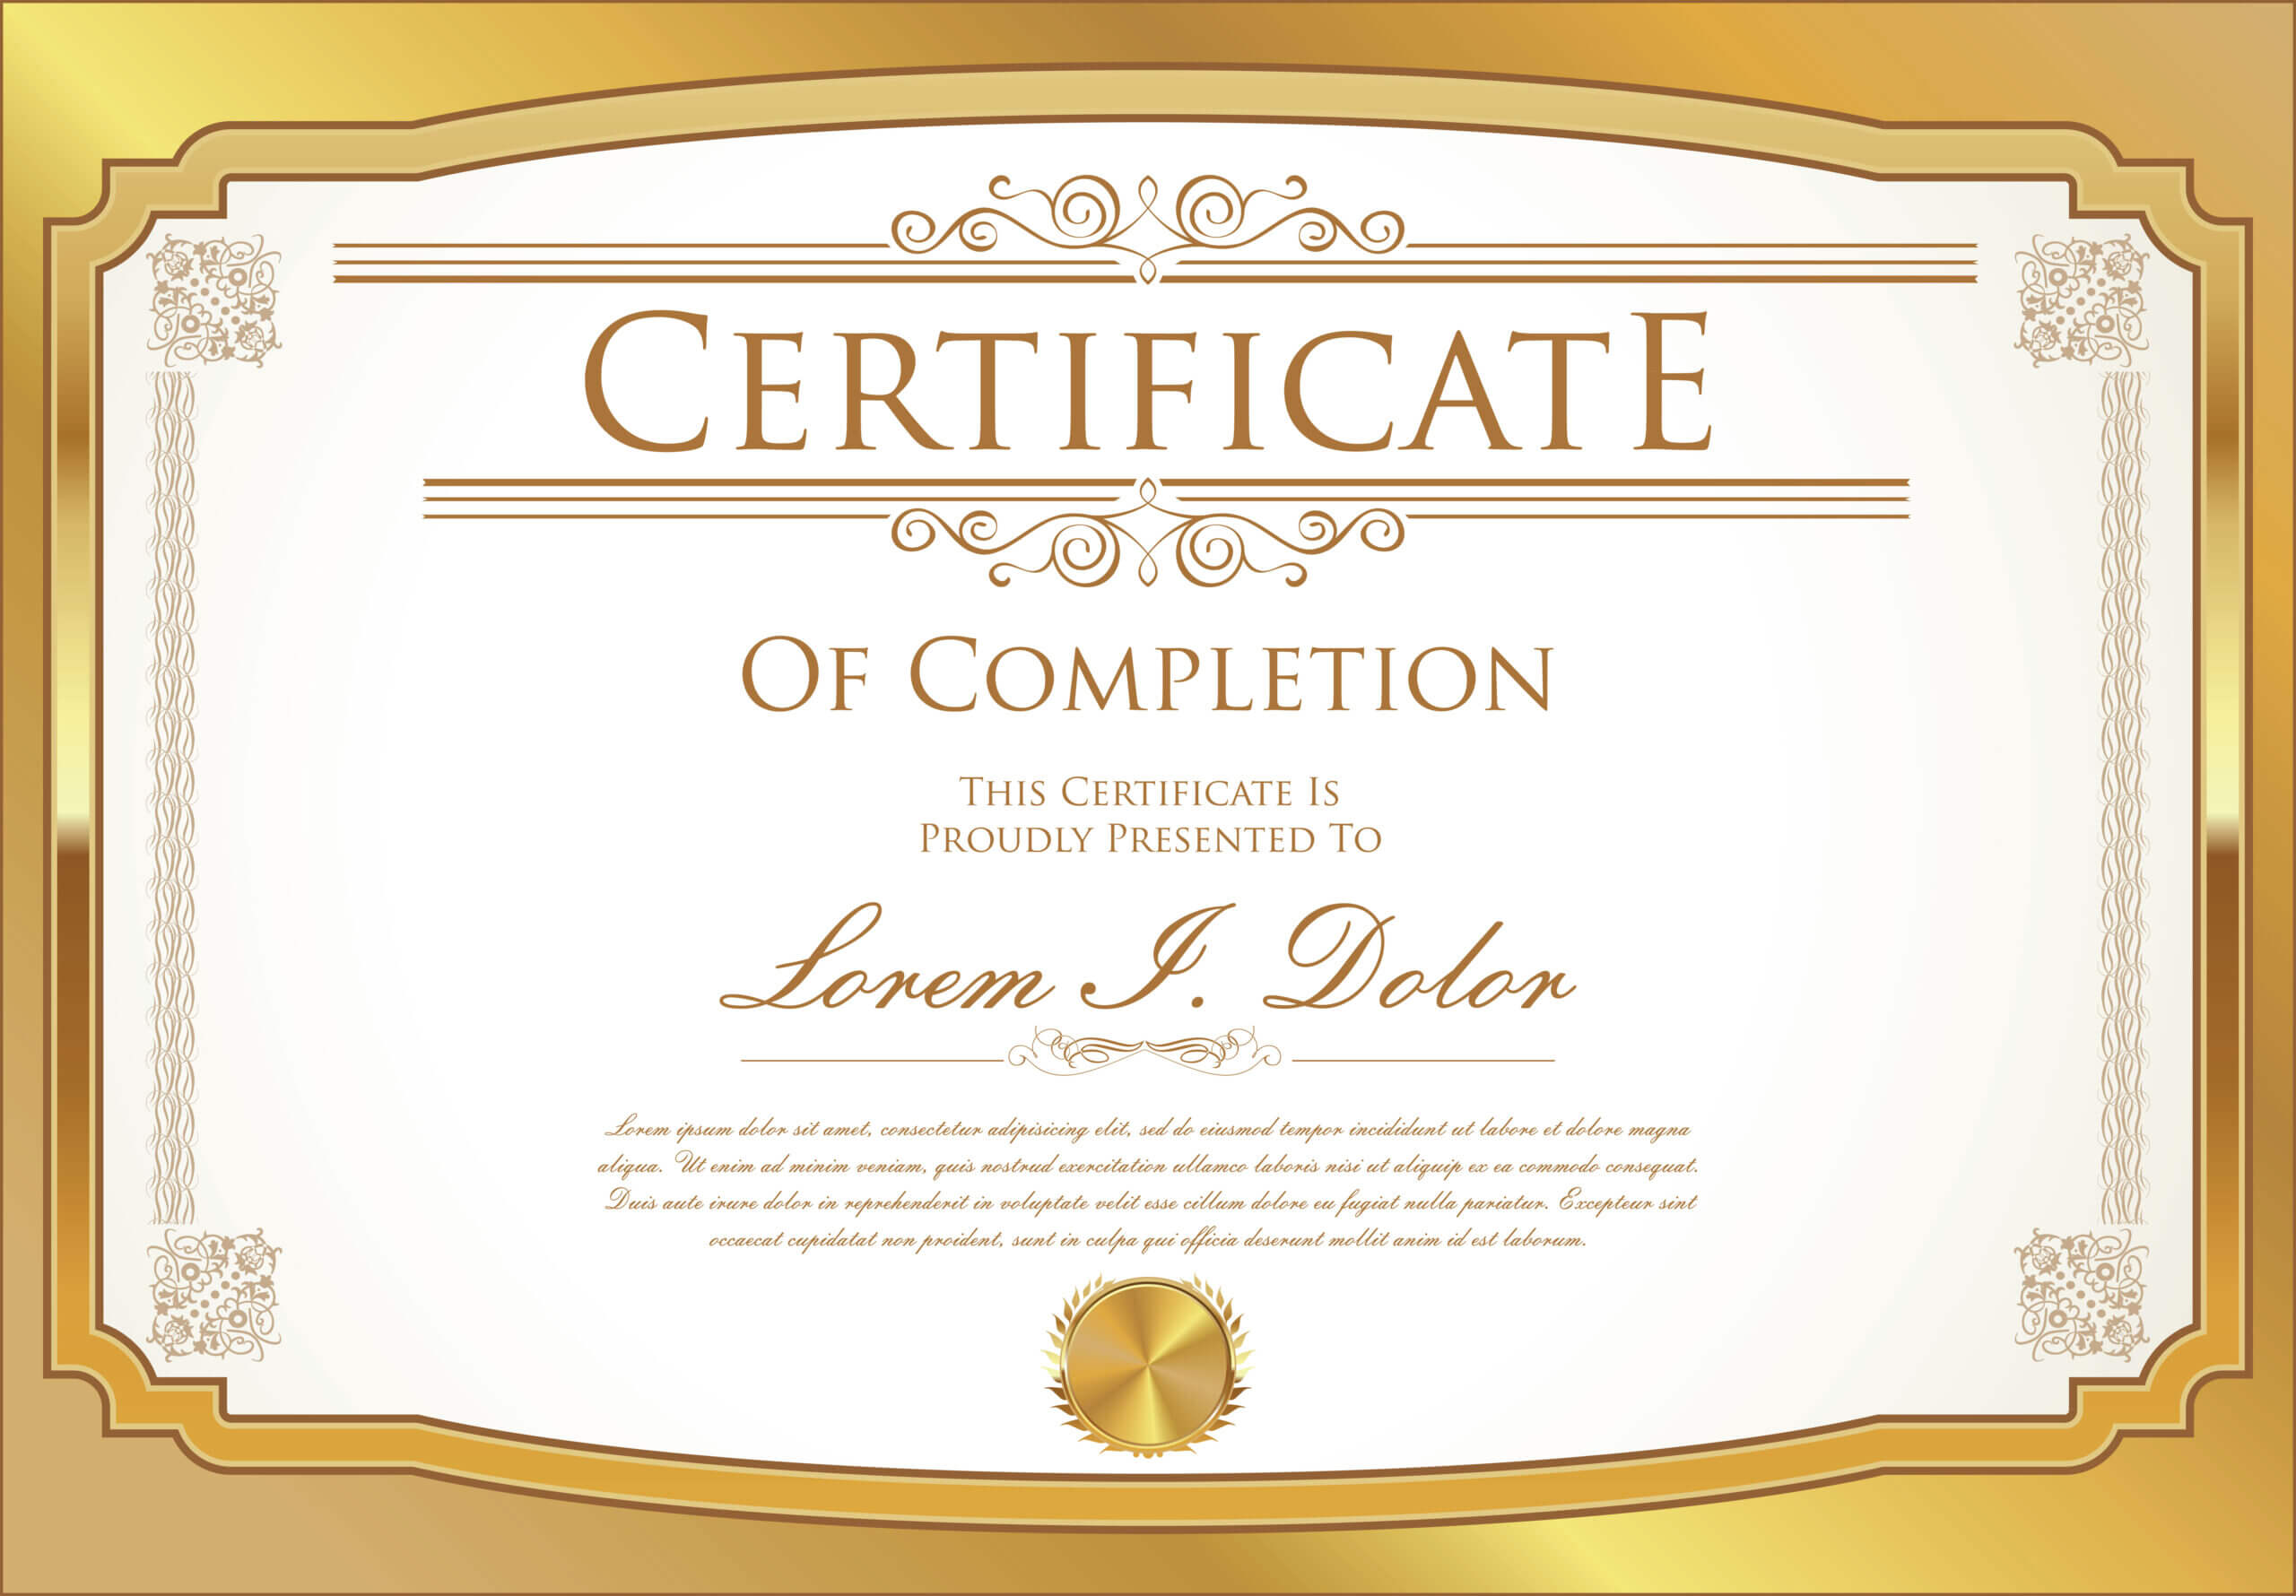 Certificate Template – Download Free Vectors, Clipart Throughout Commemorative Certificate Template